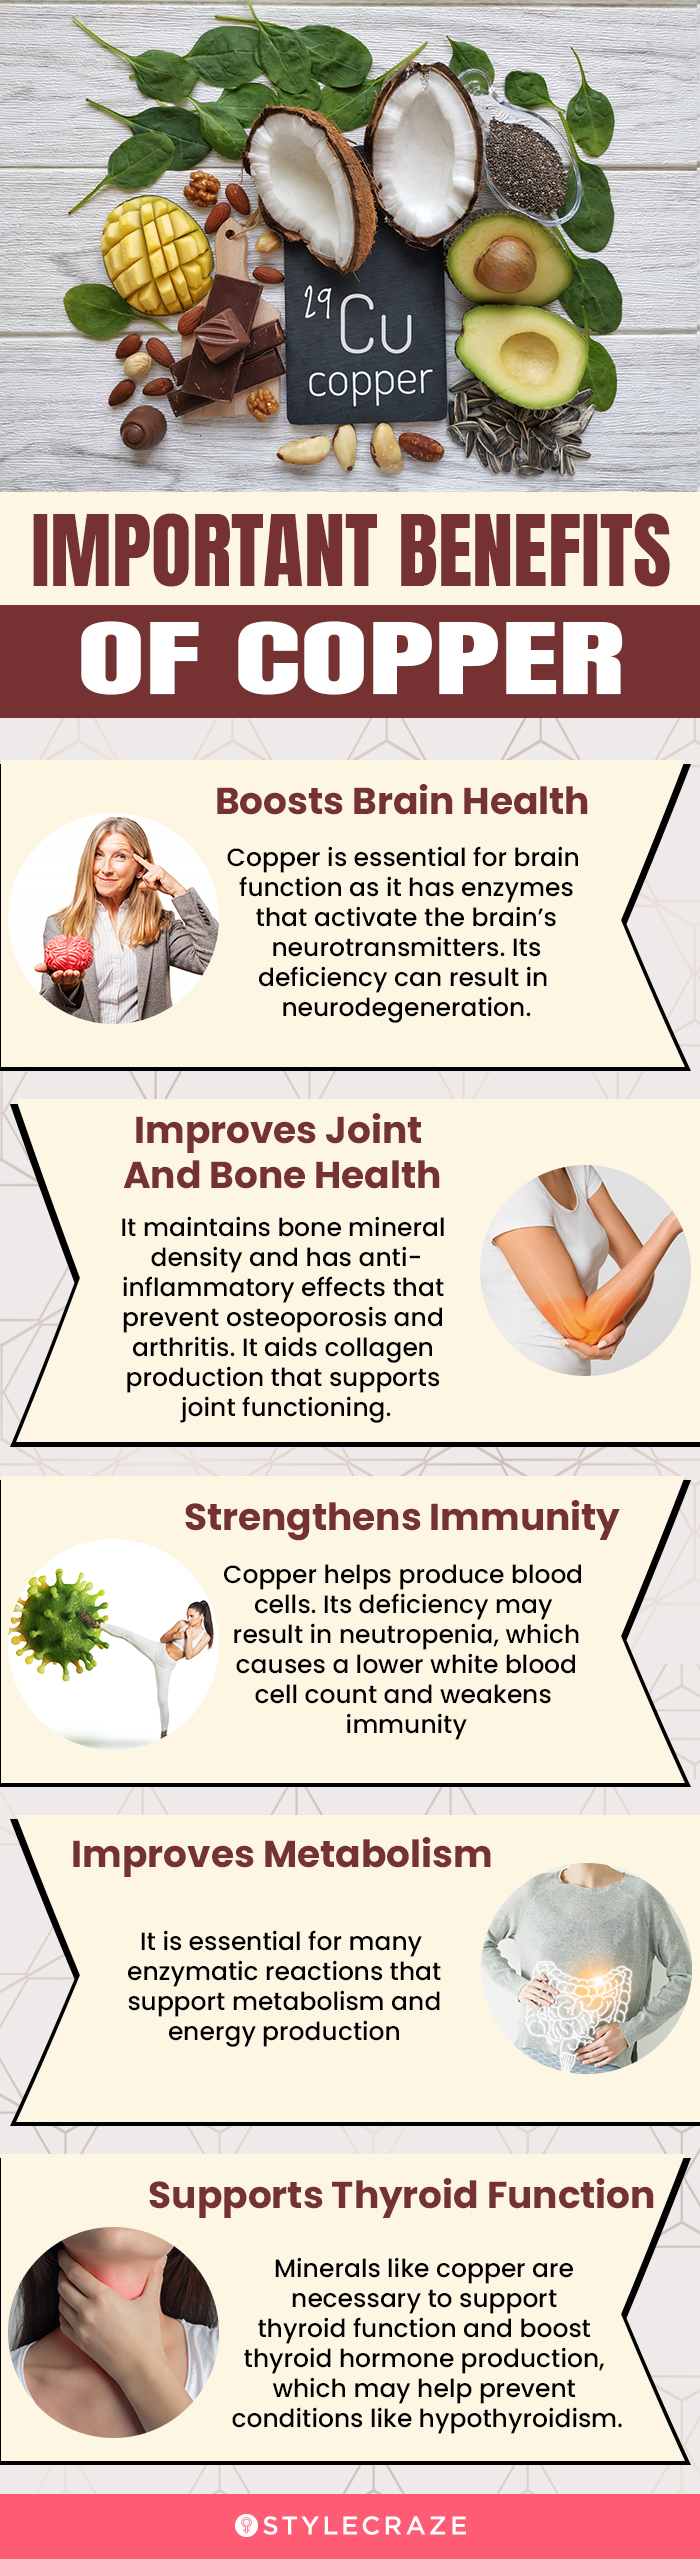 important benefits of copper (infographic)